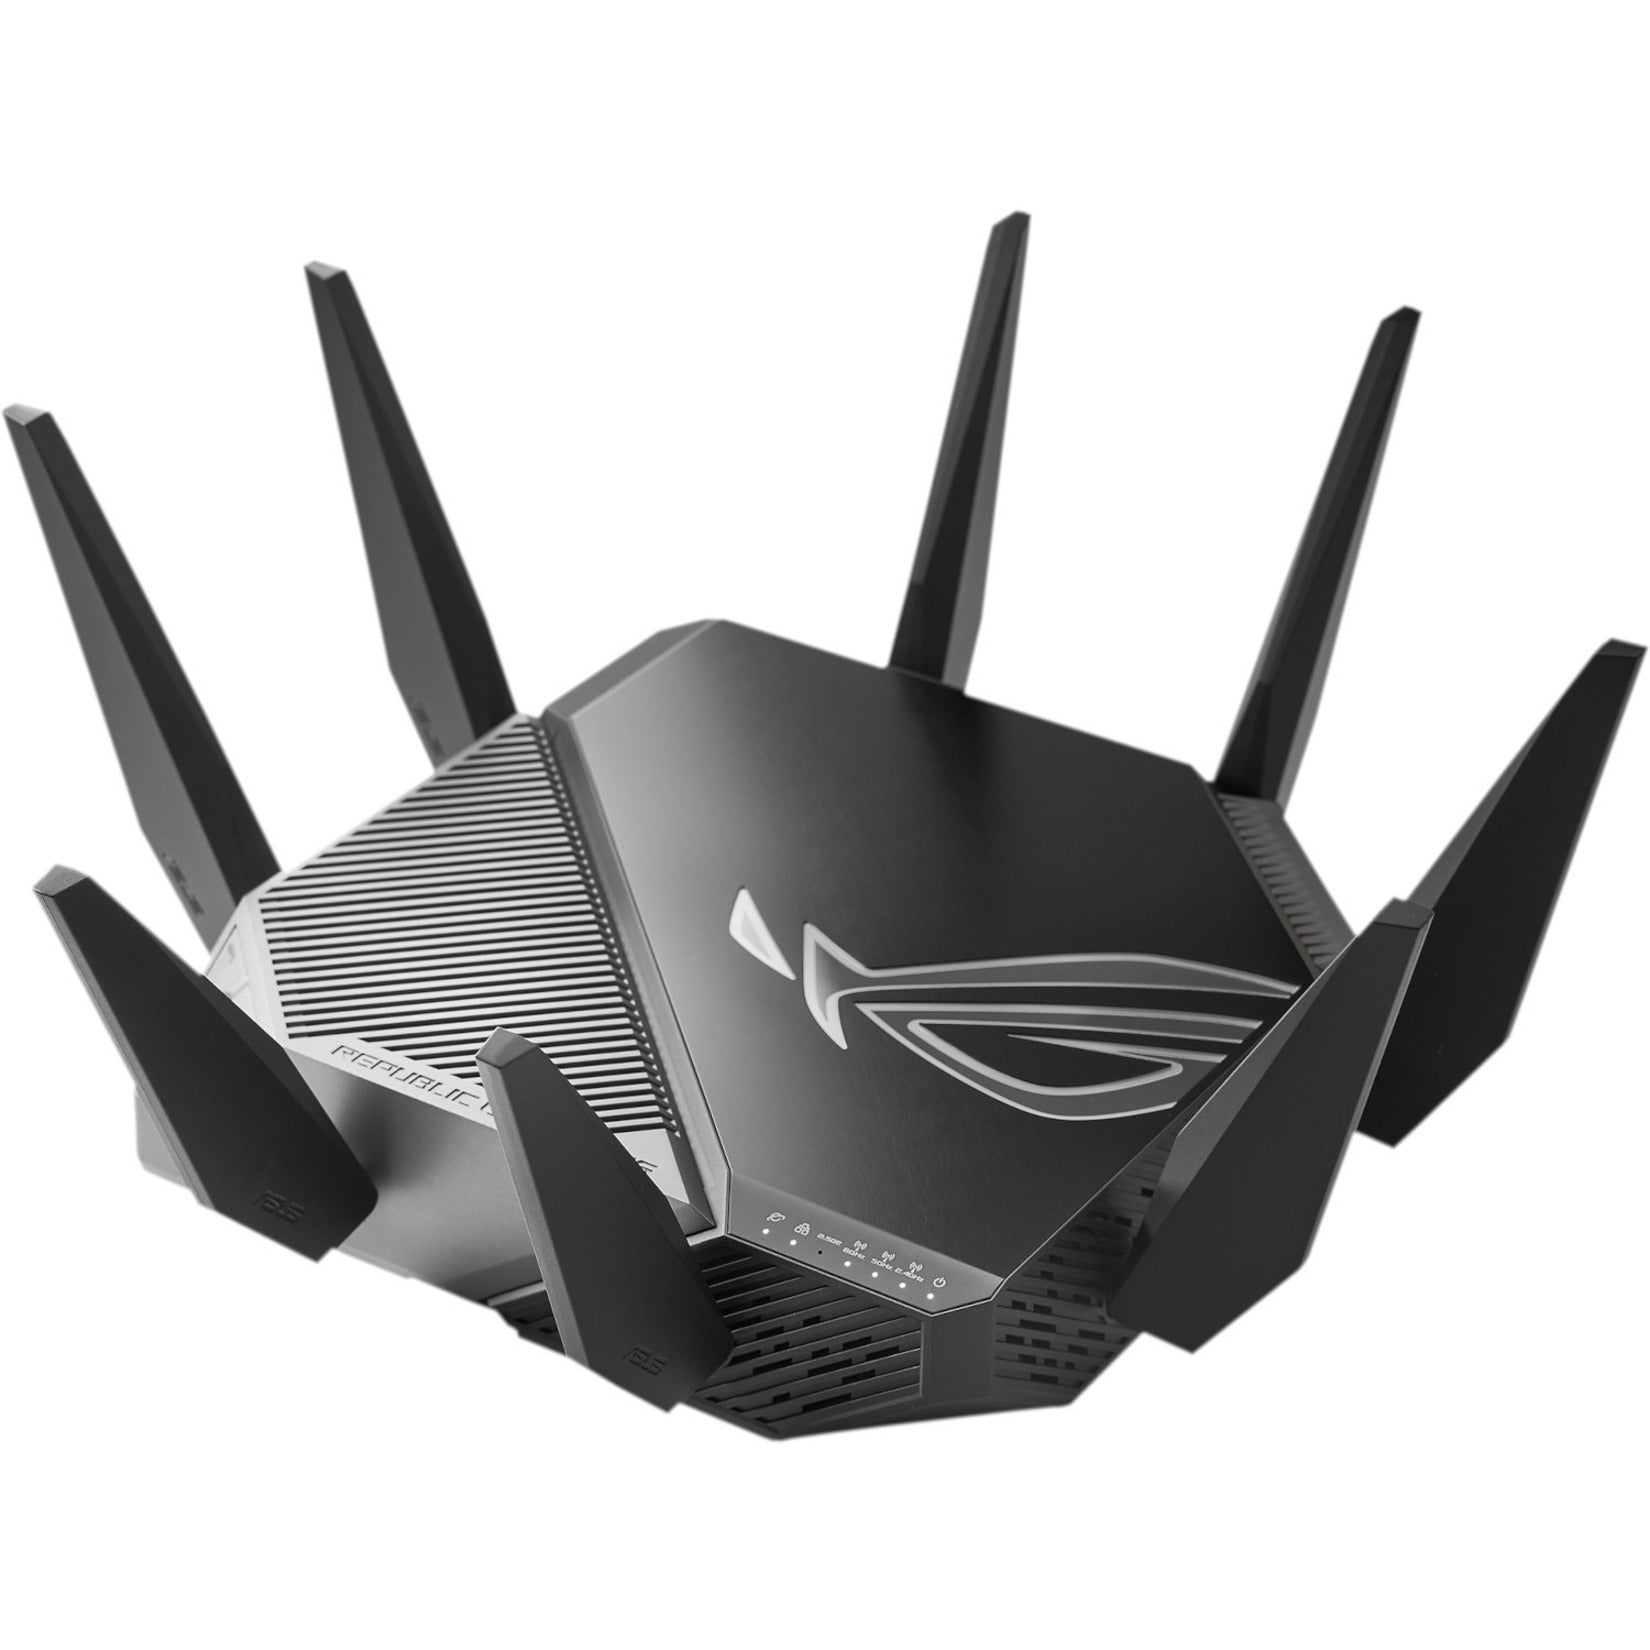 ASUS WiFi 6E Gaming Router (ROG Rapture GT-AXE11000) (90IG06E0-MA1R0T) - Tri-Band 10 Gigabit Wireless Router, World's first 6Ghz Band for Wider Channels & Higher Capacity, 1.8GHz Quad-Core processor, 2.5G Port, Gaming & Streaming. ASUS ROG GT-AXE11000 is